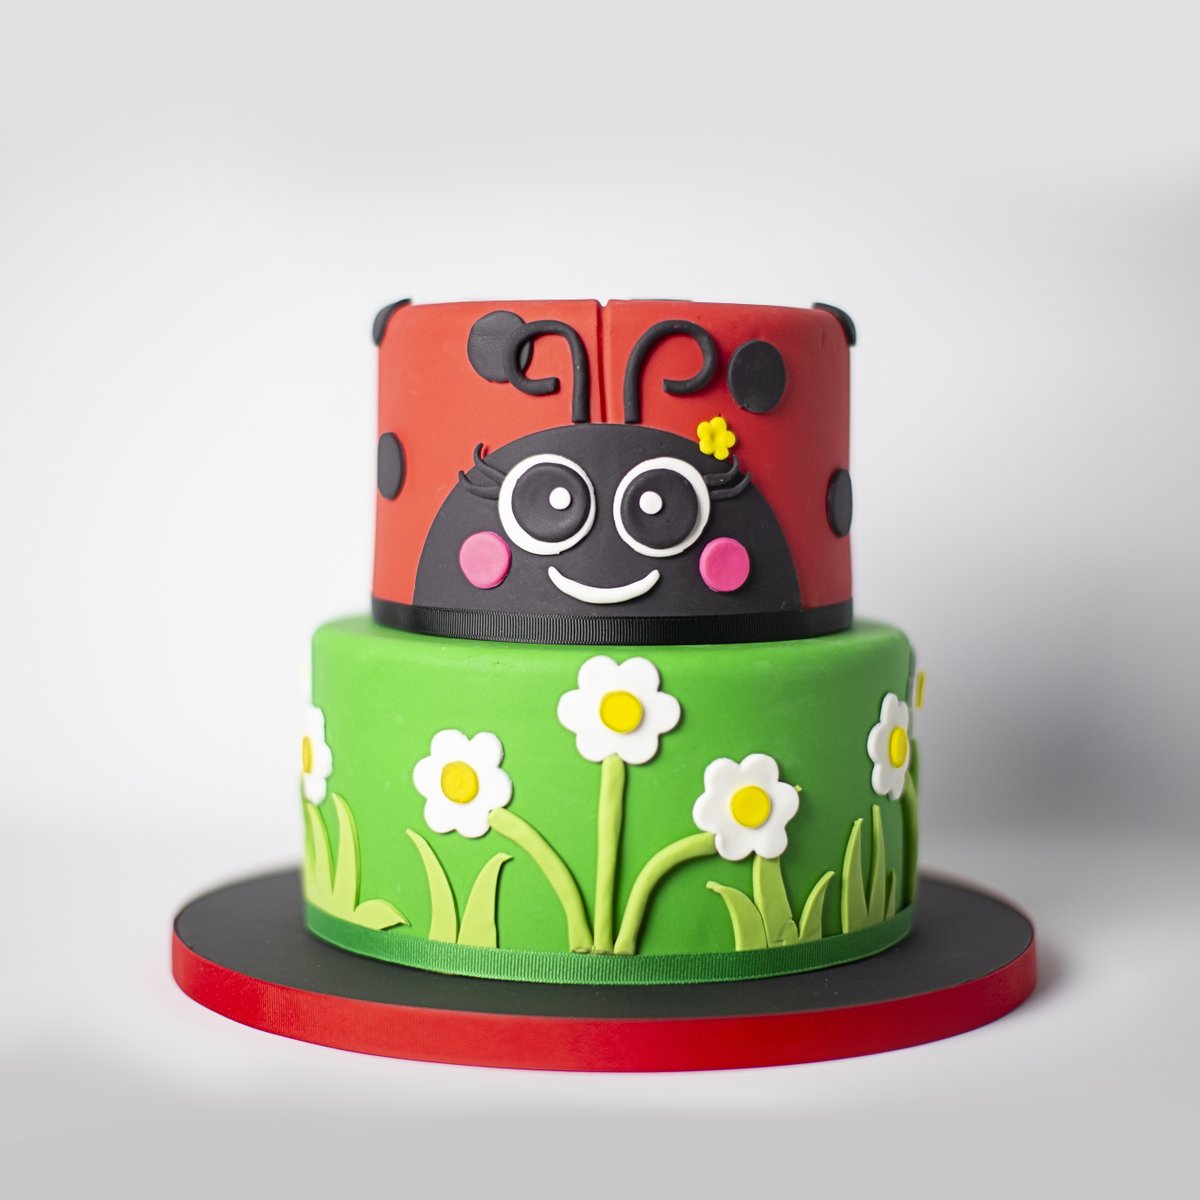 This is such a fun design for any kiddos birthday party who loves nature and lady bugs! 
charm-city-cakes.square.site/product/lady-b…

#ladybugparty #ladybug #kidsbirthday #cake #charmcitycakes #baltimore #baltimorecake #spring #baltimorecake